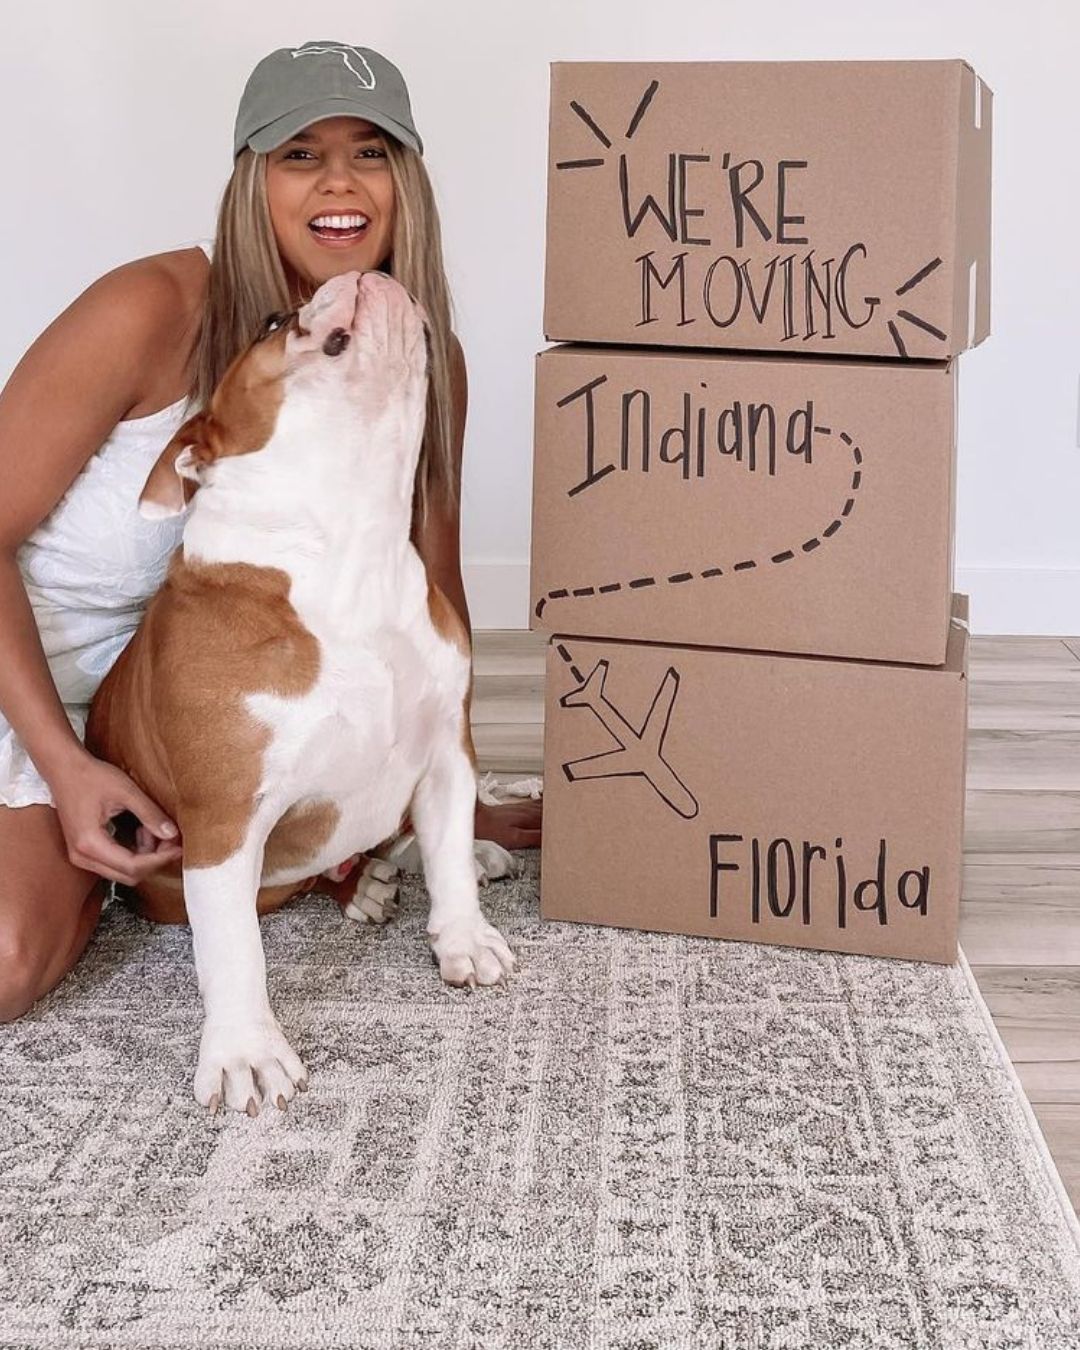 Larissa white sits on the Carina rug next to her pup and stacked boxes with "We're moving from Indiana to Florida" written on them.